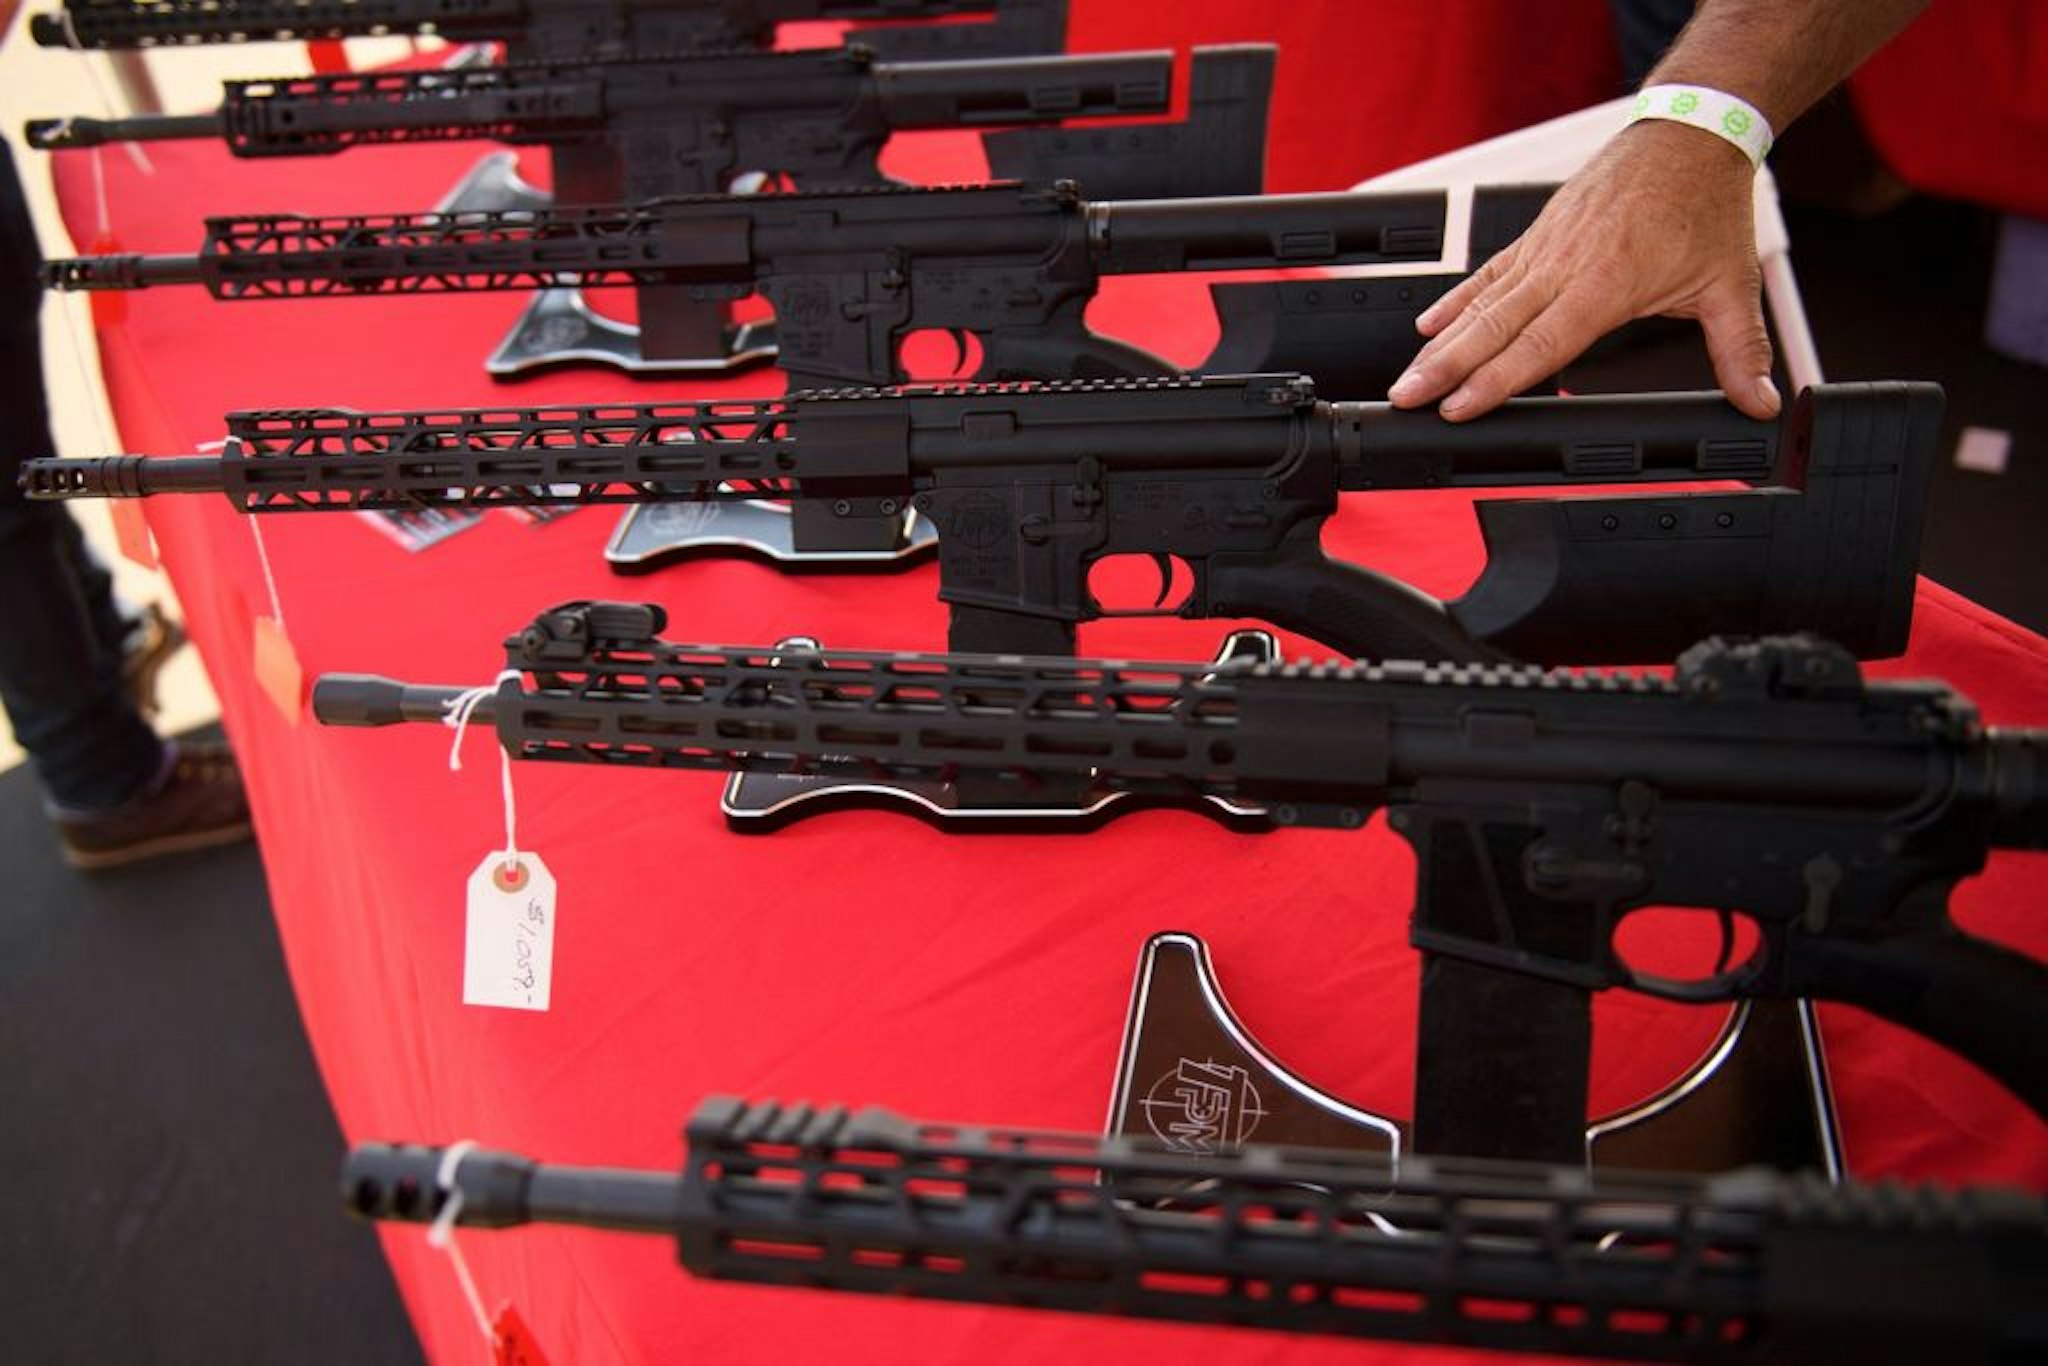 A TPM Arms LLC California-legal featureless AR-15 style rifle is displayed for sale at the company's booth at the Crossroads of the West Gun Show at the Orange County Fairgrounds on June 5, 2021 in Costa Mesa, California. - Gun sales increased in the US following Covid-19 pandemic lockdowns. On June 4, a San Diego federal court judge overturned California's three-decade old ban on assault weapons, defined as a semiautomatic rifle or pistol with a detachable magazine and certain features, but granted a 30-day stay for a State appeal and likely future court decisions on the constitutionality of the ban under the Second Amendment. An industry of California legal "featureless" or "compliant" AR-15 style rifles developed for California consumers, adapting to the law with design changes to the popular rifle. (Photo by Patrick T. FALLON / AFP)